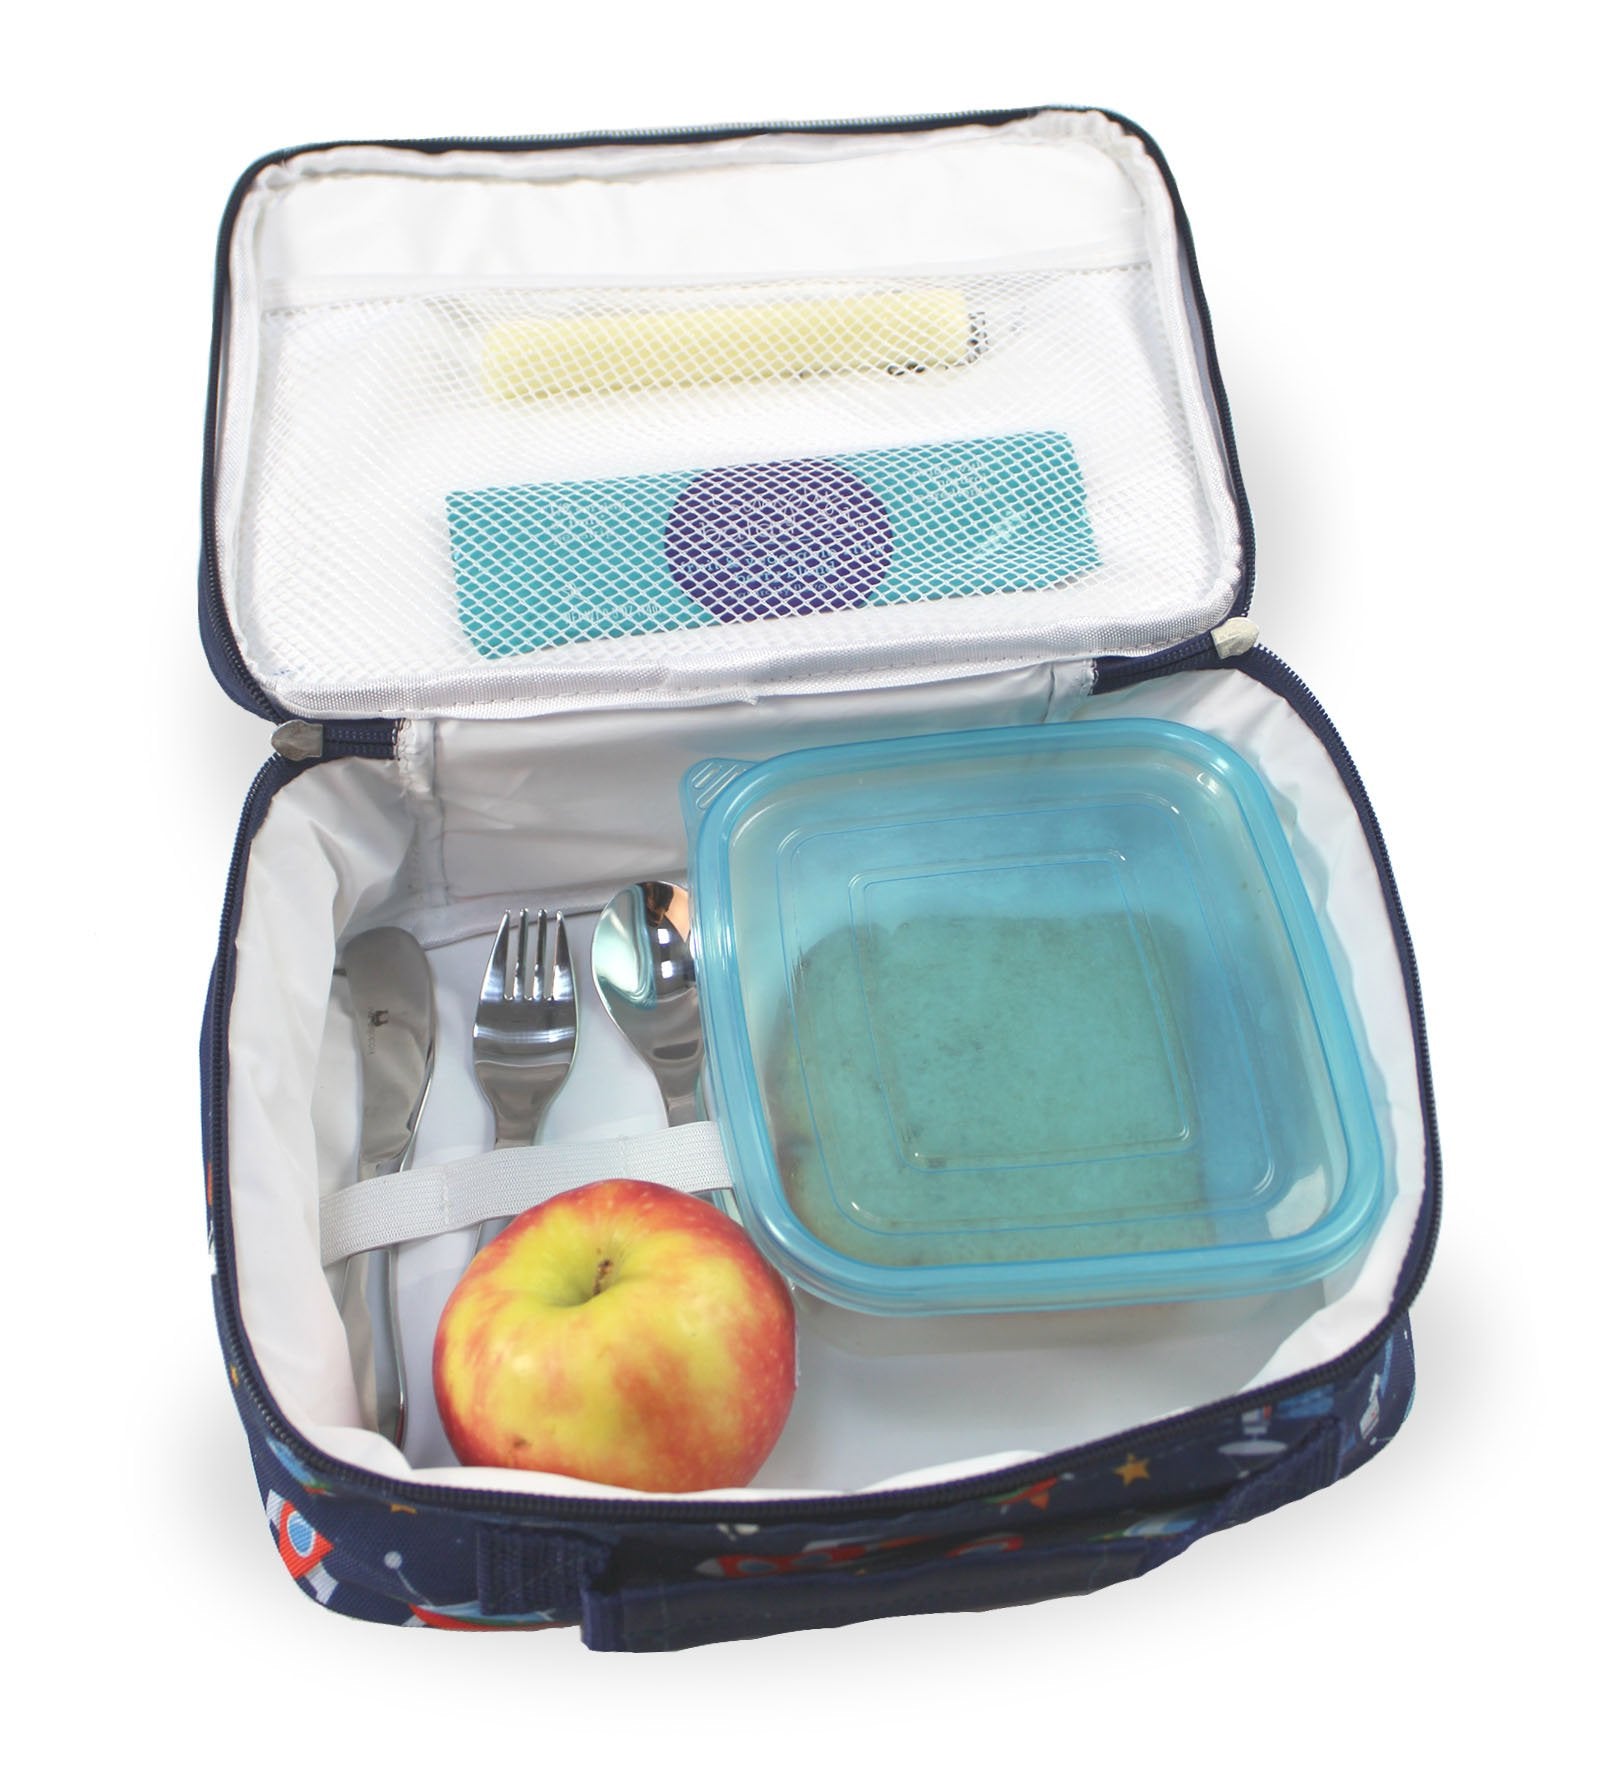 Gianno Space Lunch Box for Kids - Kids Lunchbox for School, Daycare, Kindergarten - Insulated Lunch Box for Girls & Boys - with Handle, Shoulder Strap